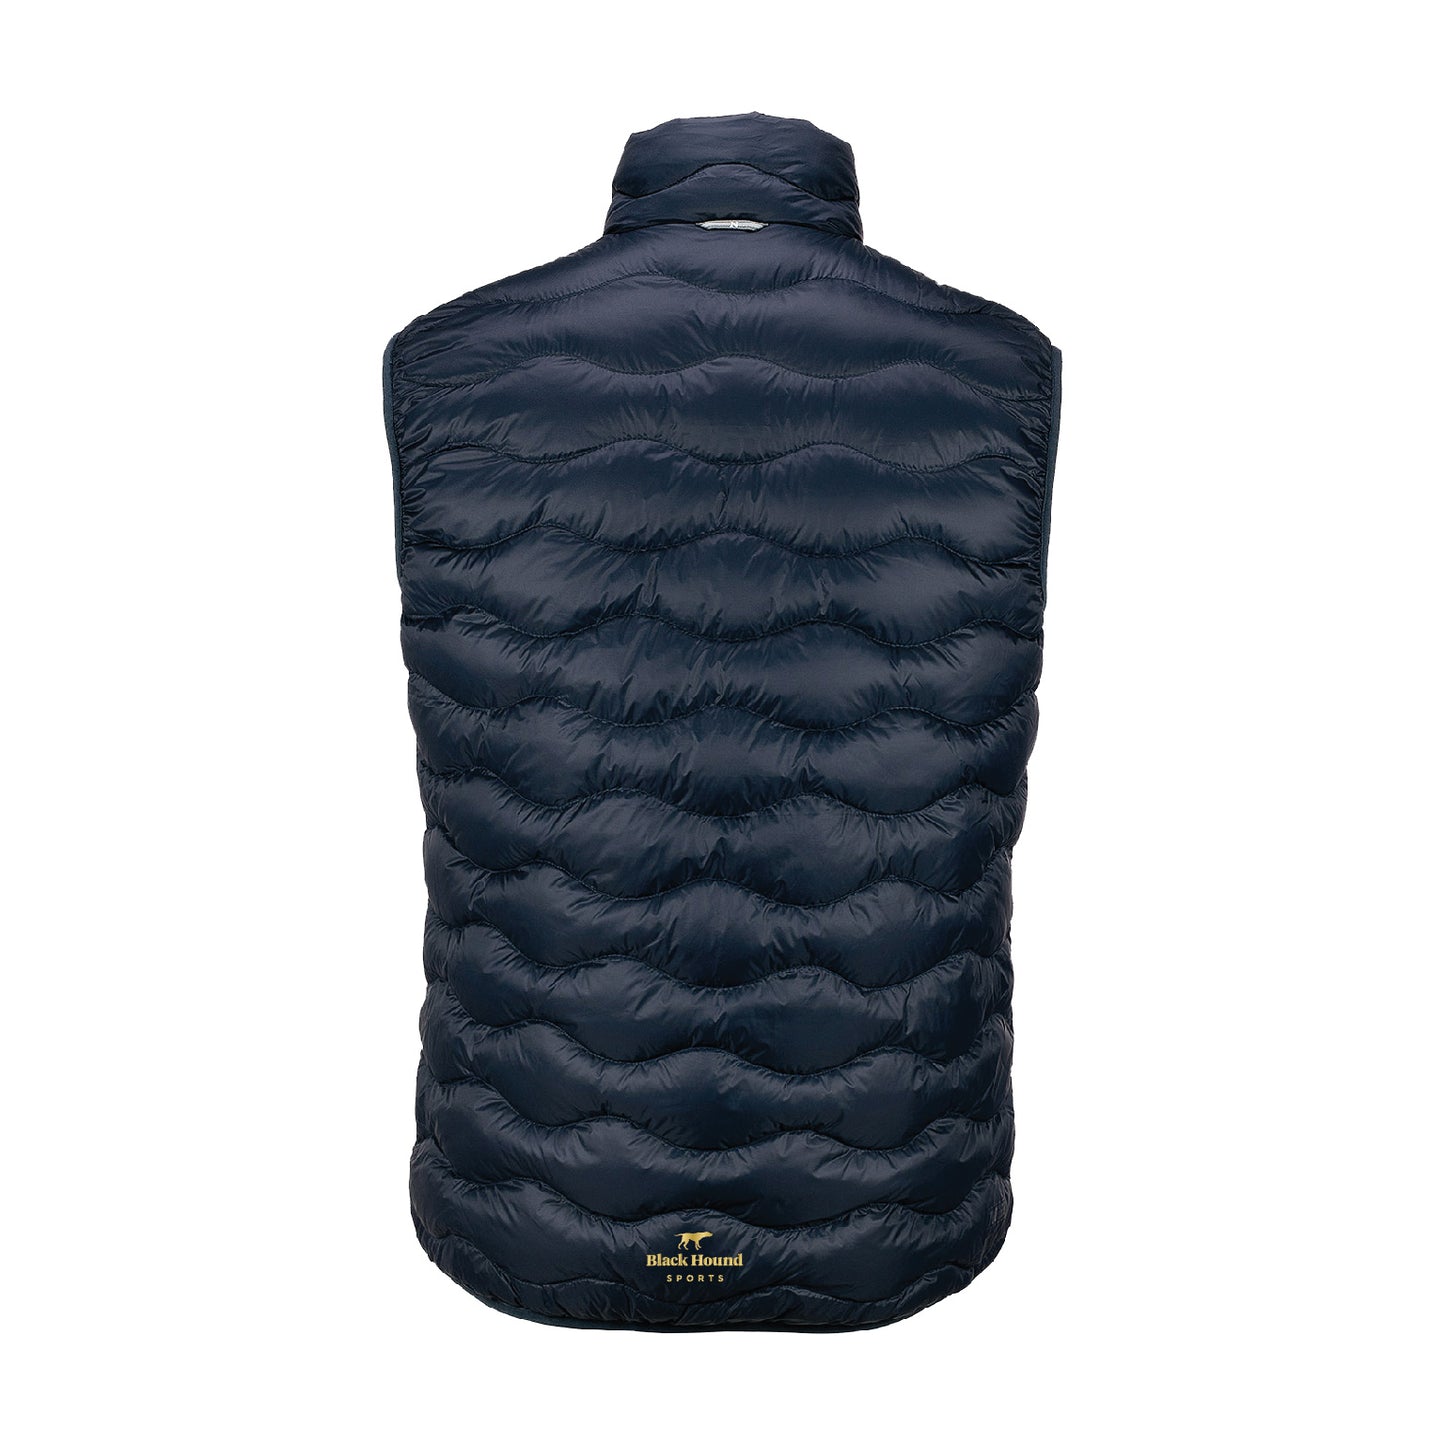 Asia Cup Padded Down Gilet